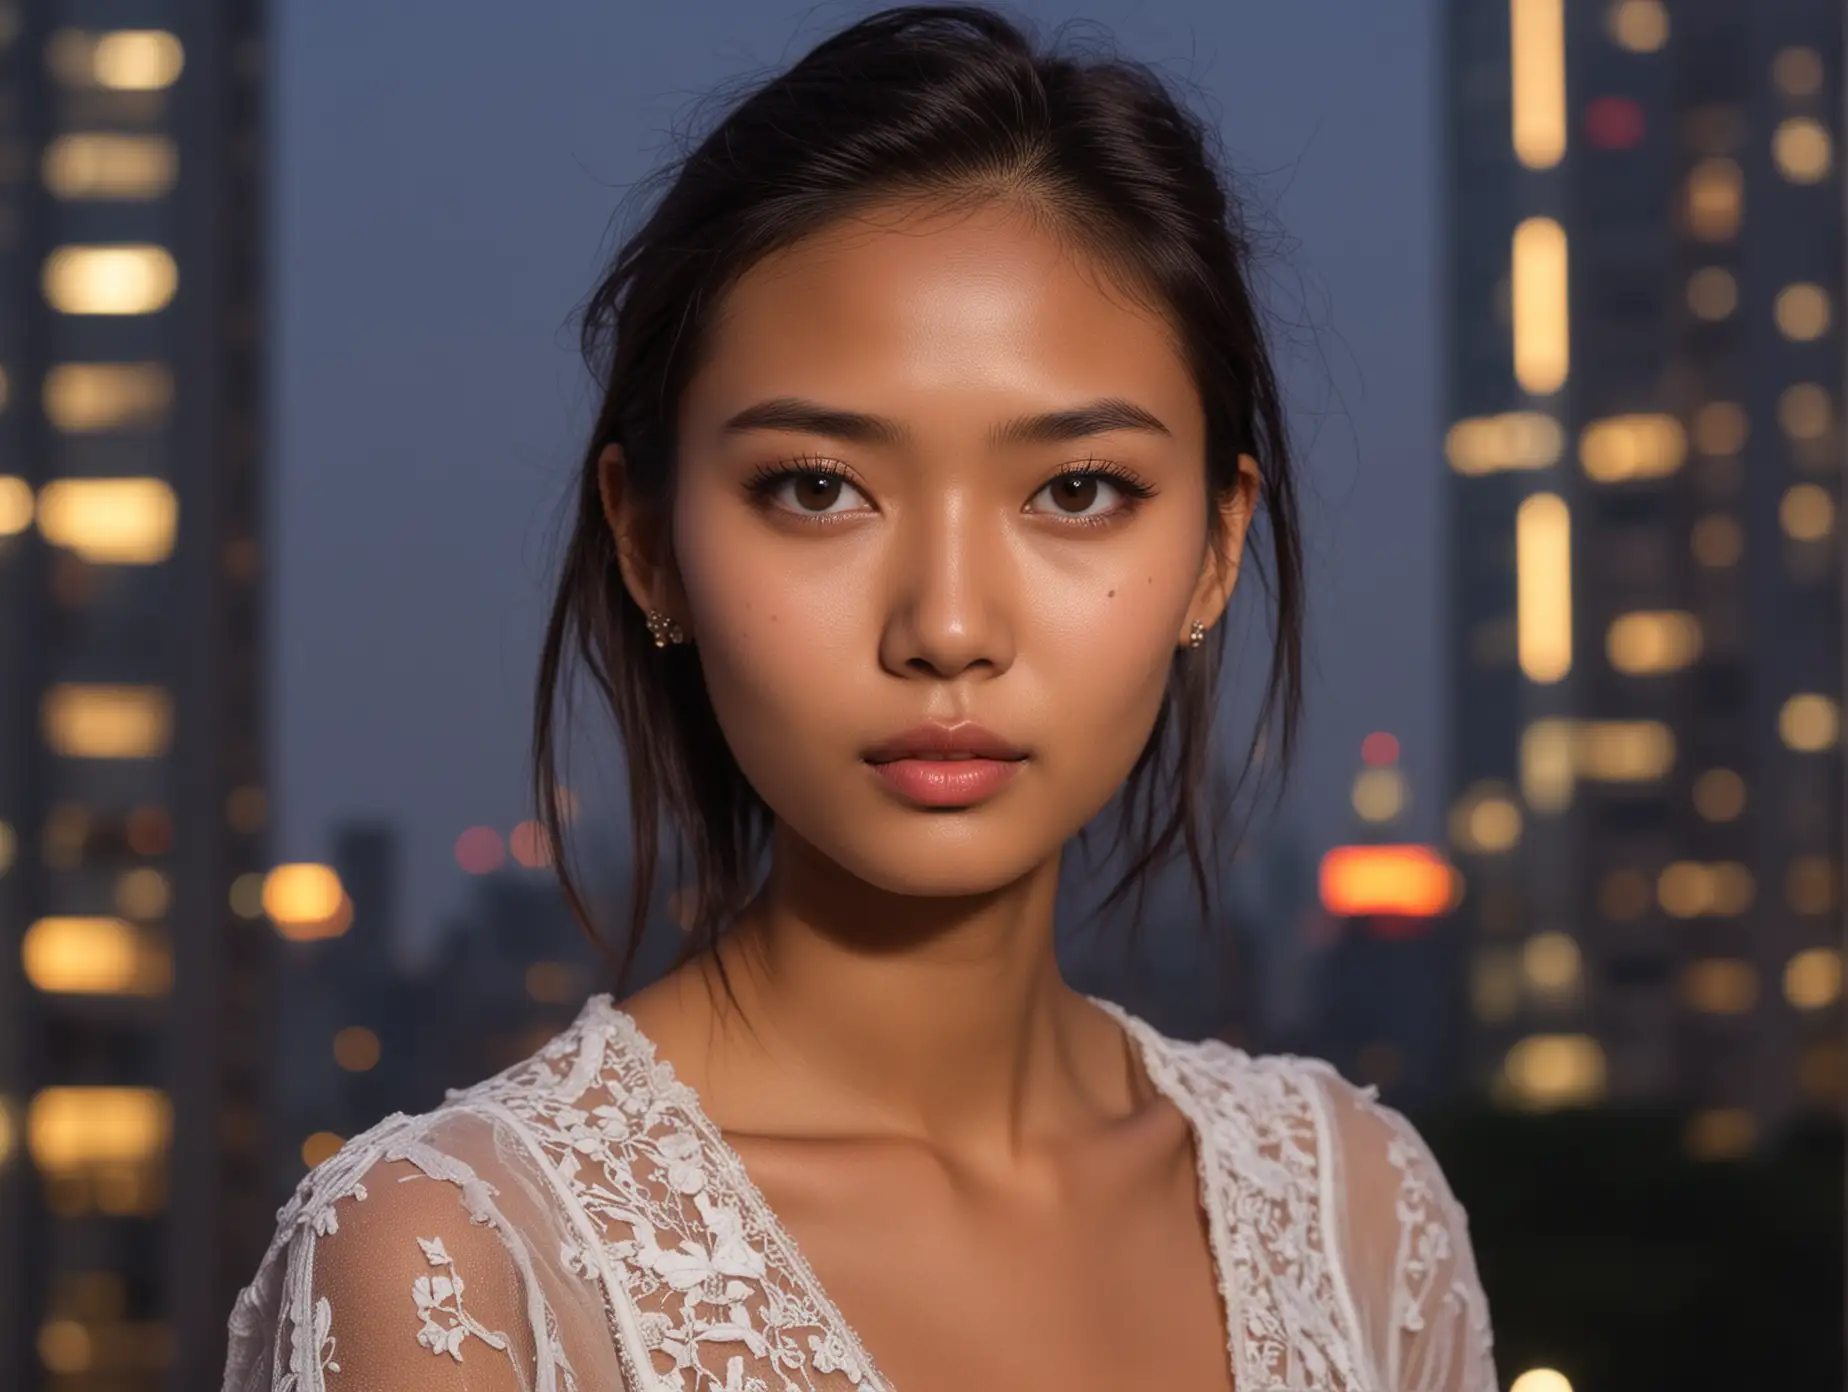 face of an angelic sweet skinny dark-skinned fashion model from myanmar at a party at dusk in a luxury high rise in shanghai. she has a sweet kind face and soulful intelligent eyes.